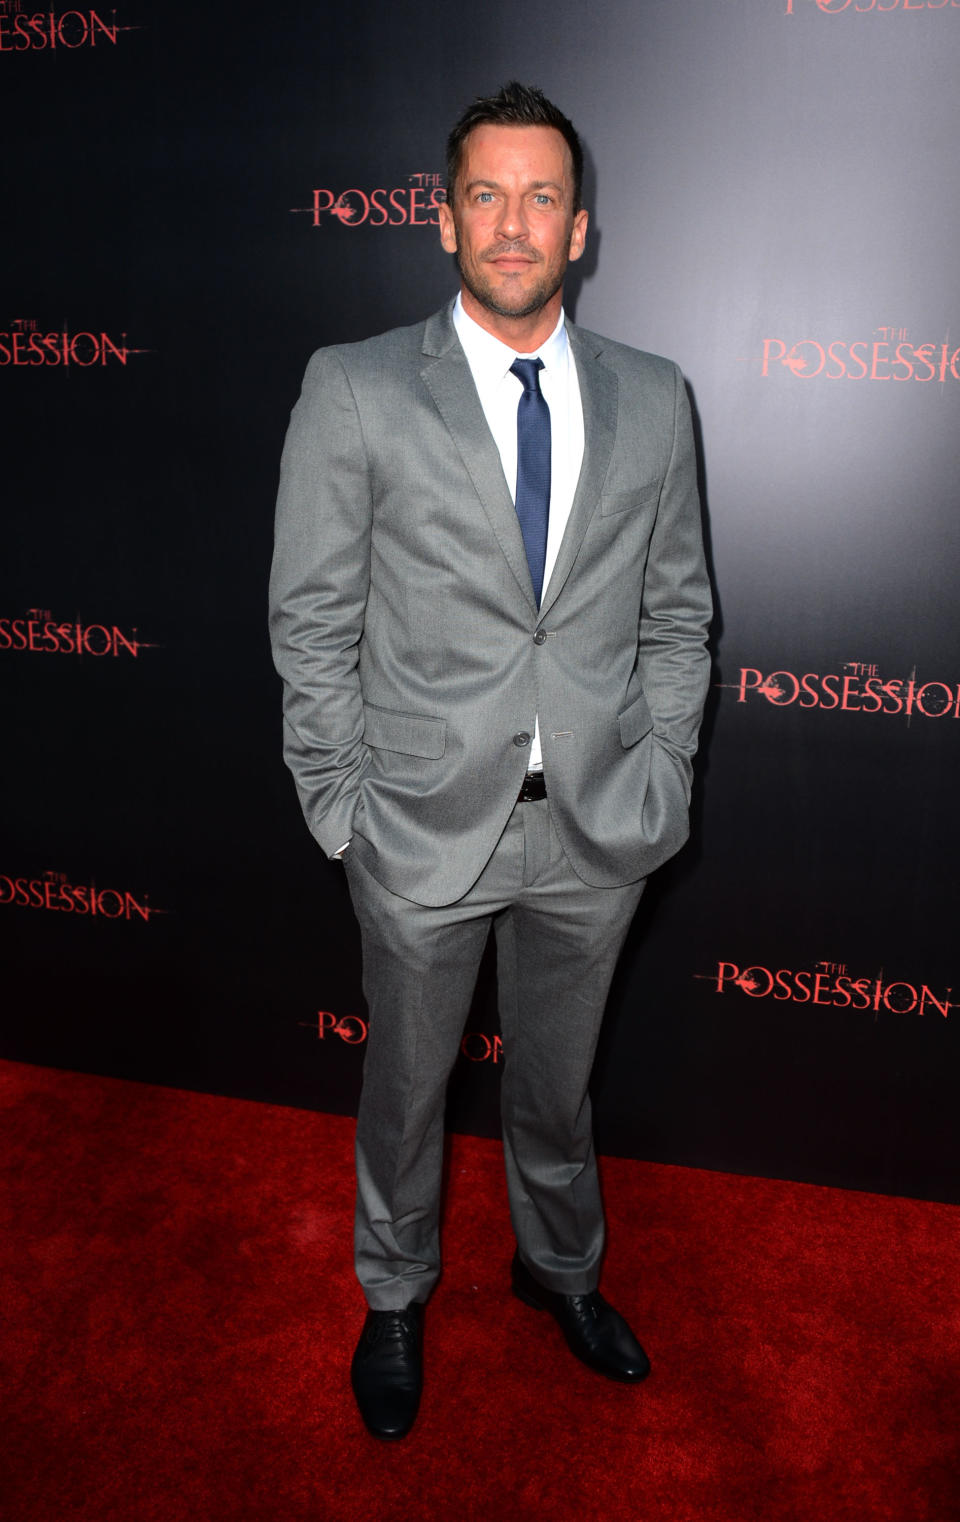 Craig Parker at the Los Angeles premiere of "The Possession" on August 28, 2012.